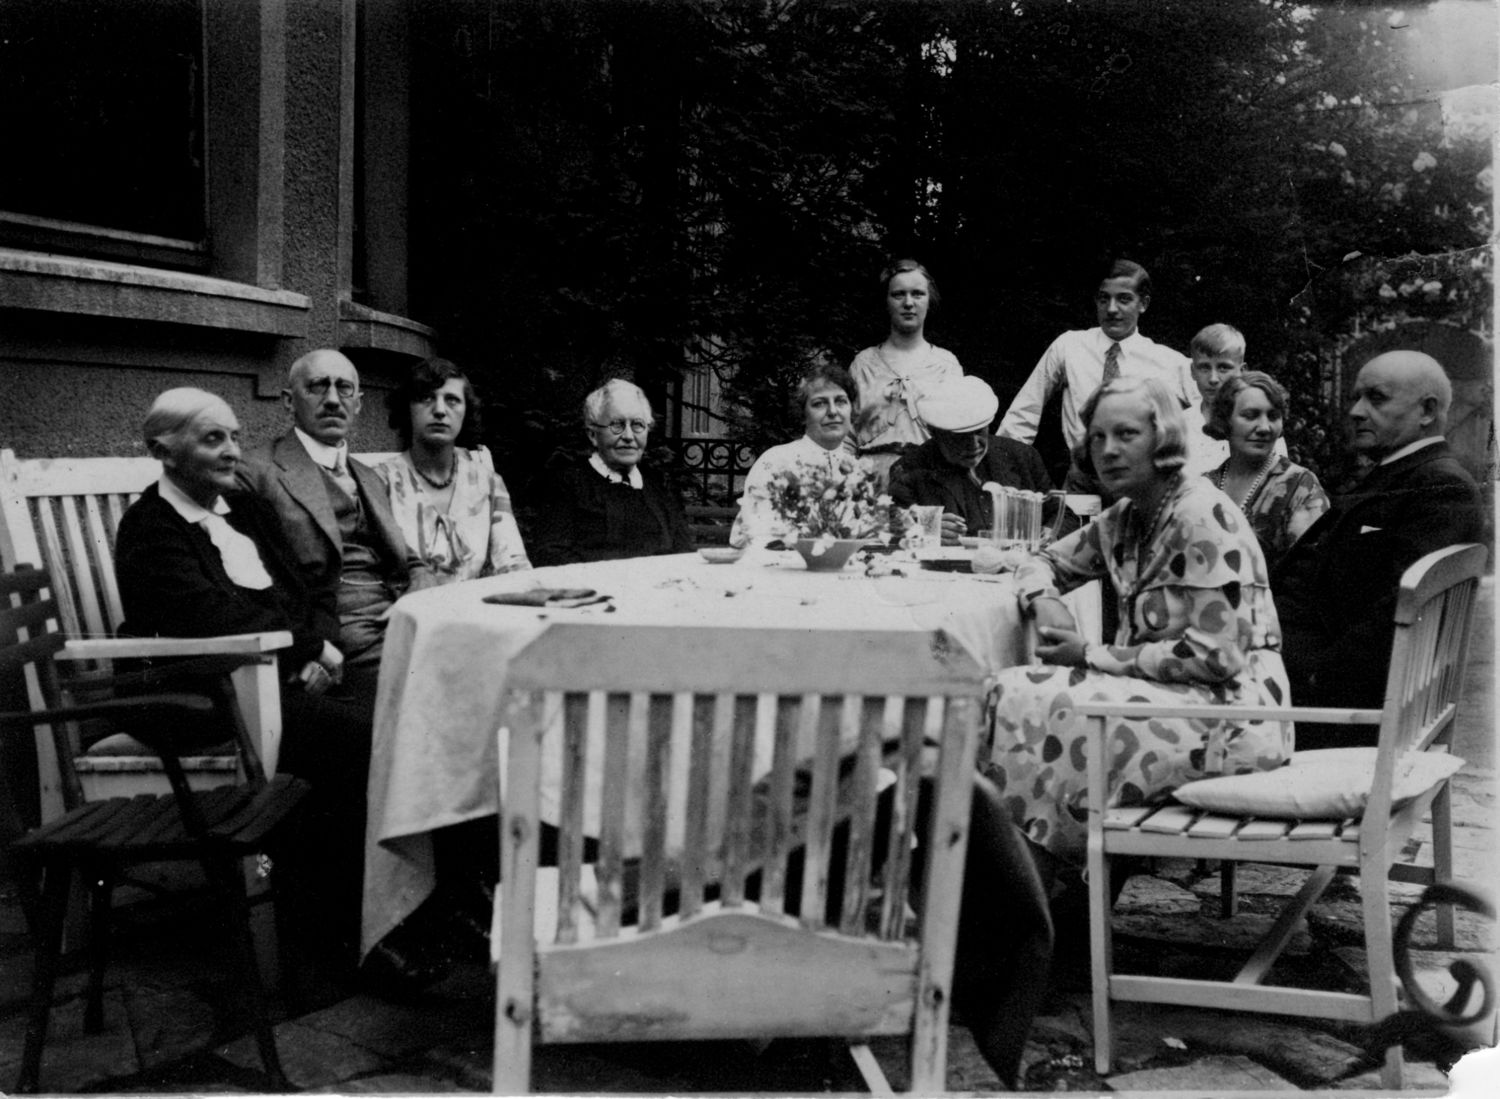 Jawlensky at the table in the Kirchhoff’s garden, Beethovenstraße 10, Summer 1927. Photo: Private Archive Heinrich Kirchhoff ⁄ Estate Mieze Binsack